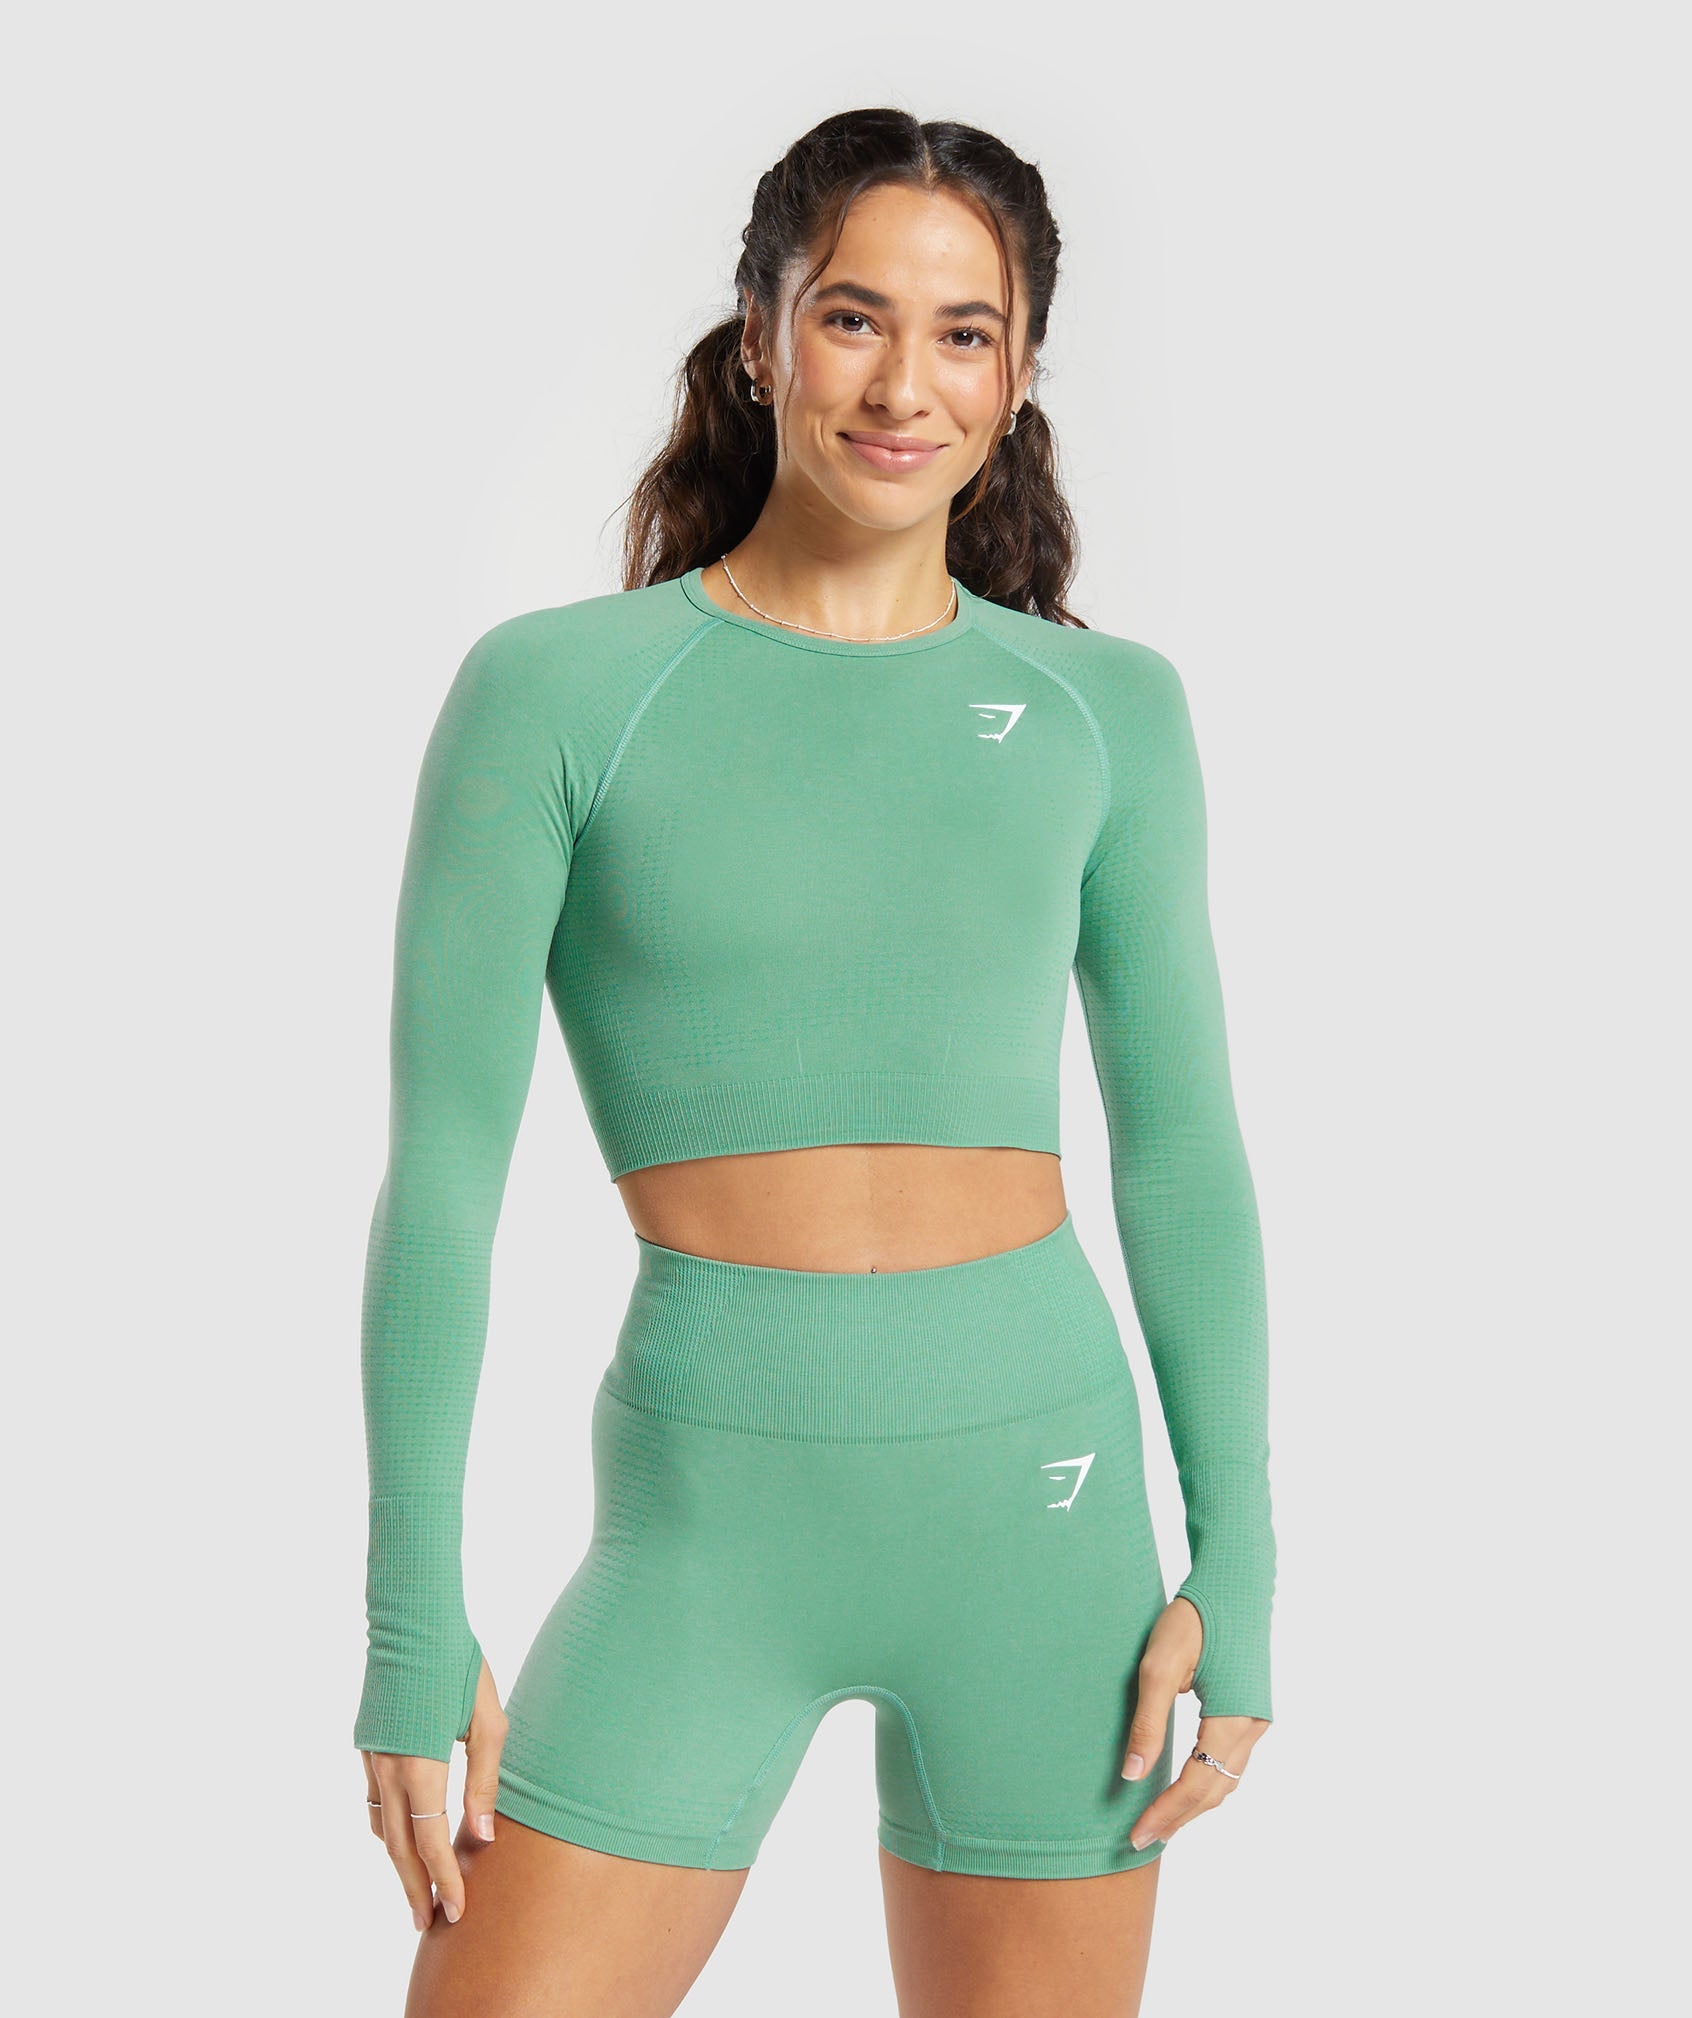 Vital Seamless 2.0 Crop Top in Lagoon Green/ Marl is out of stock